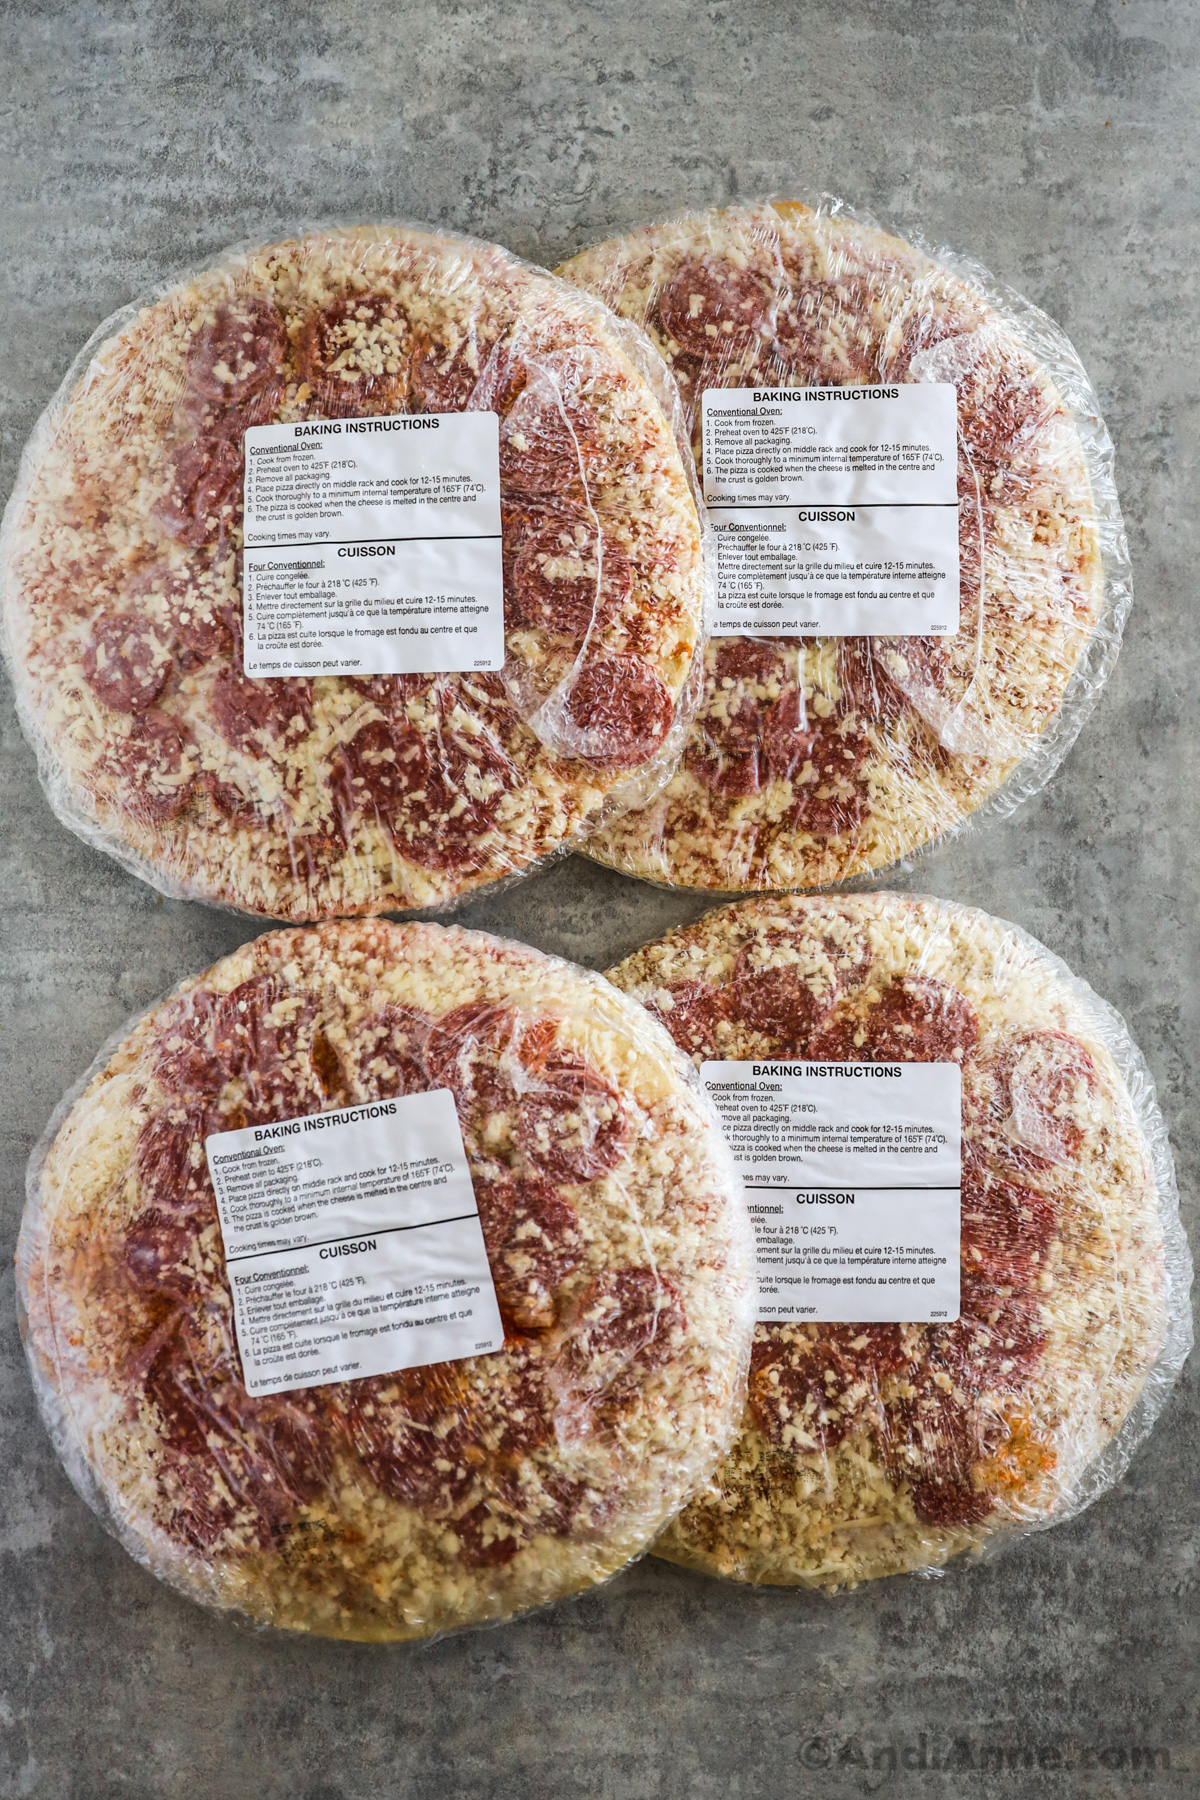 Four frozen pepperoni pizzas wrapped in packaging with baking instruction labels.